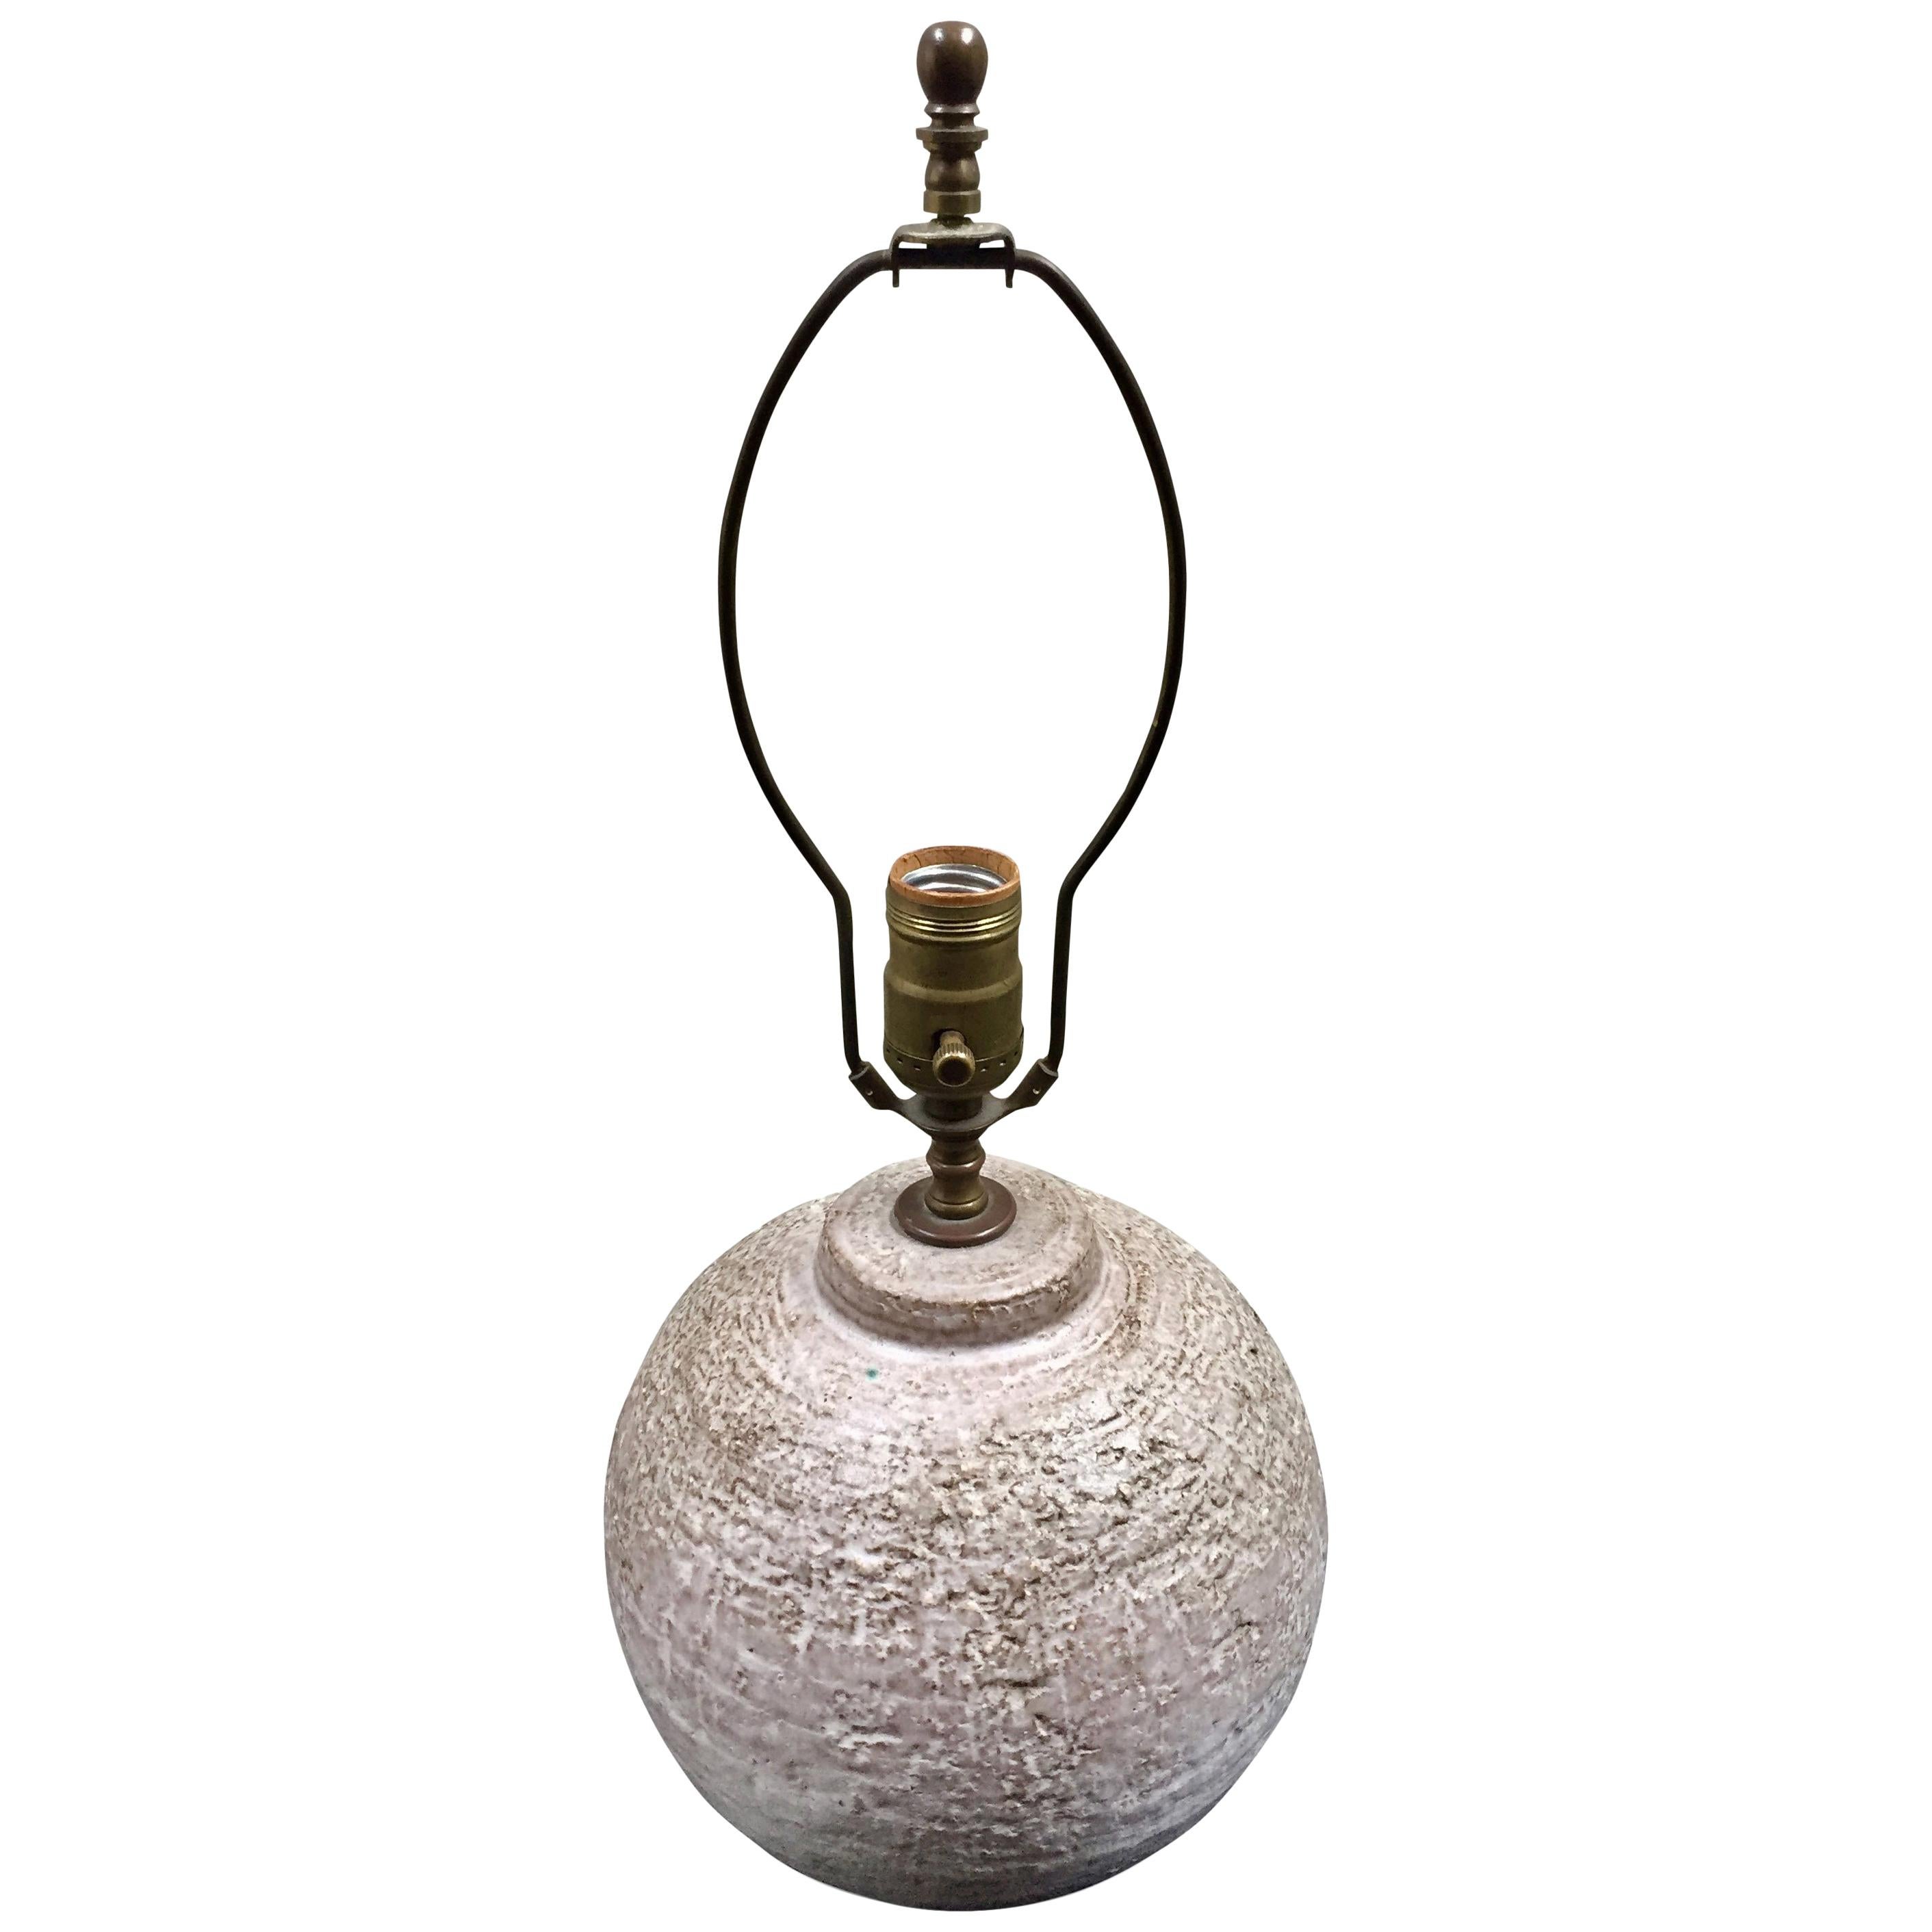 Midcentury Textured Orb Shaped Ceramic Lamp in the Style of Design Technics